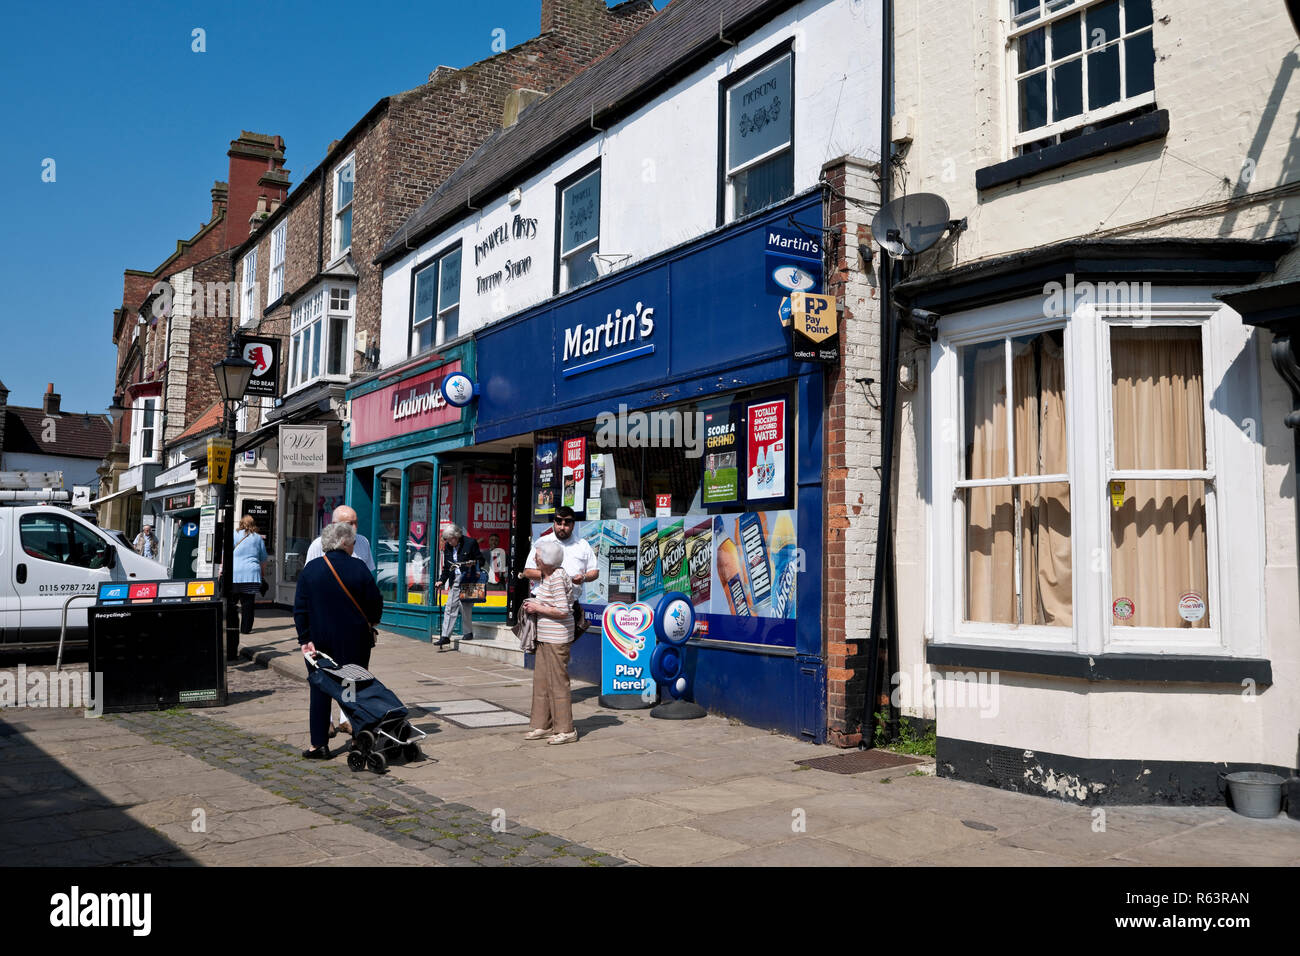 Martins supermarket and Ladbrokes betting shop store in the town centre Market Place Thirsk North Yorkshire England UK United Kingdom GB Great Britain Stock Photo